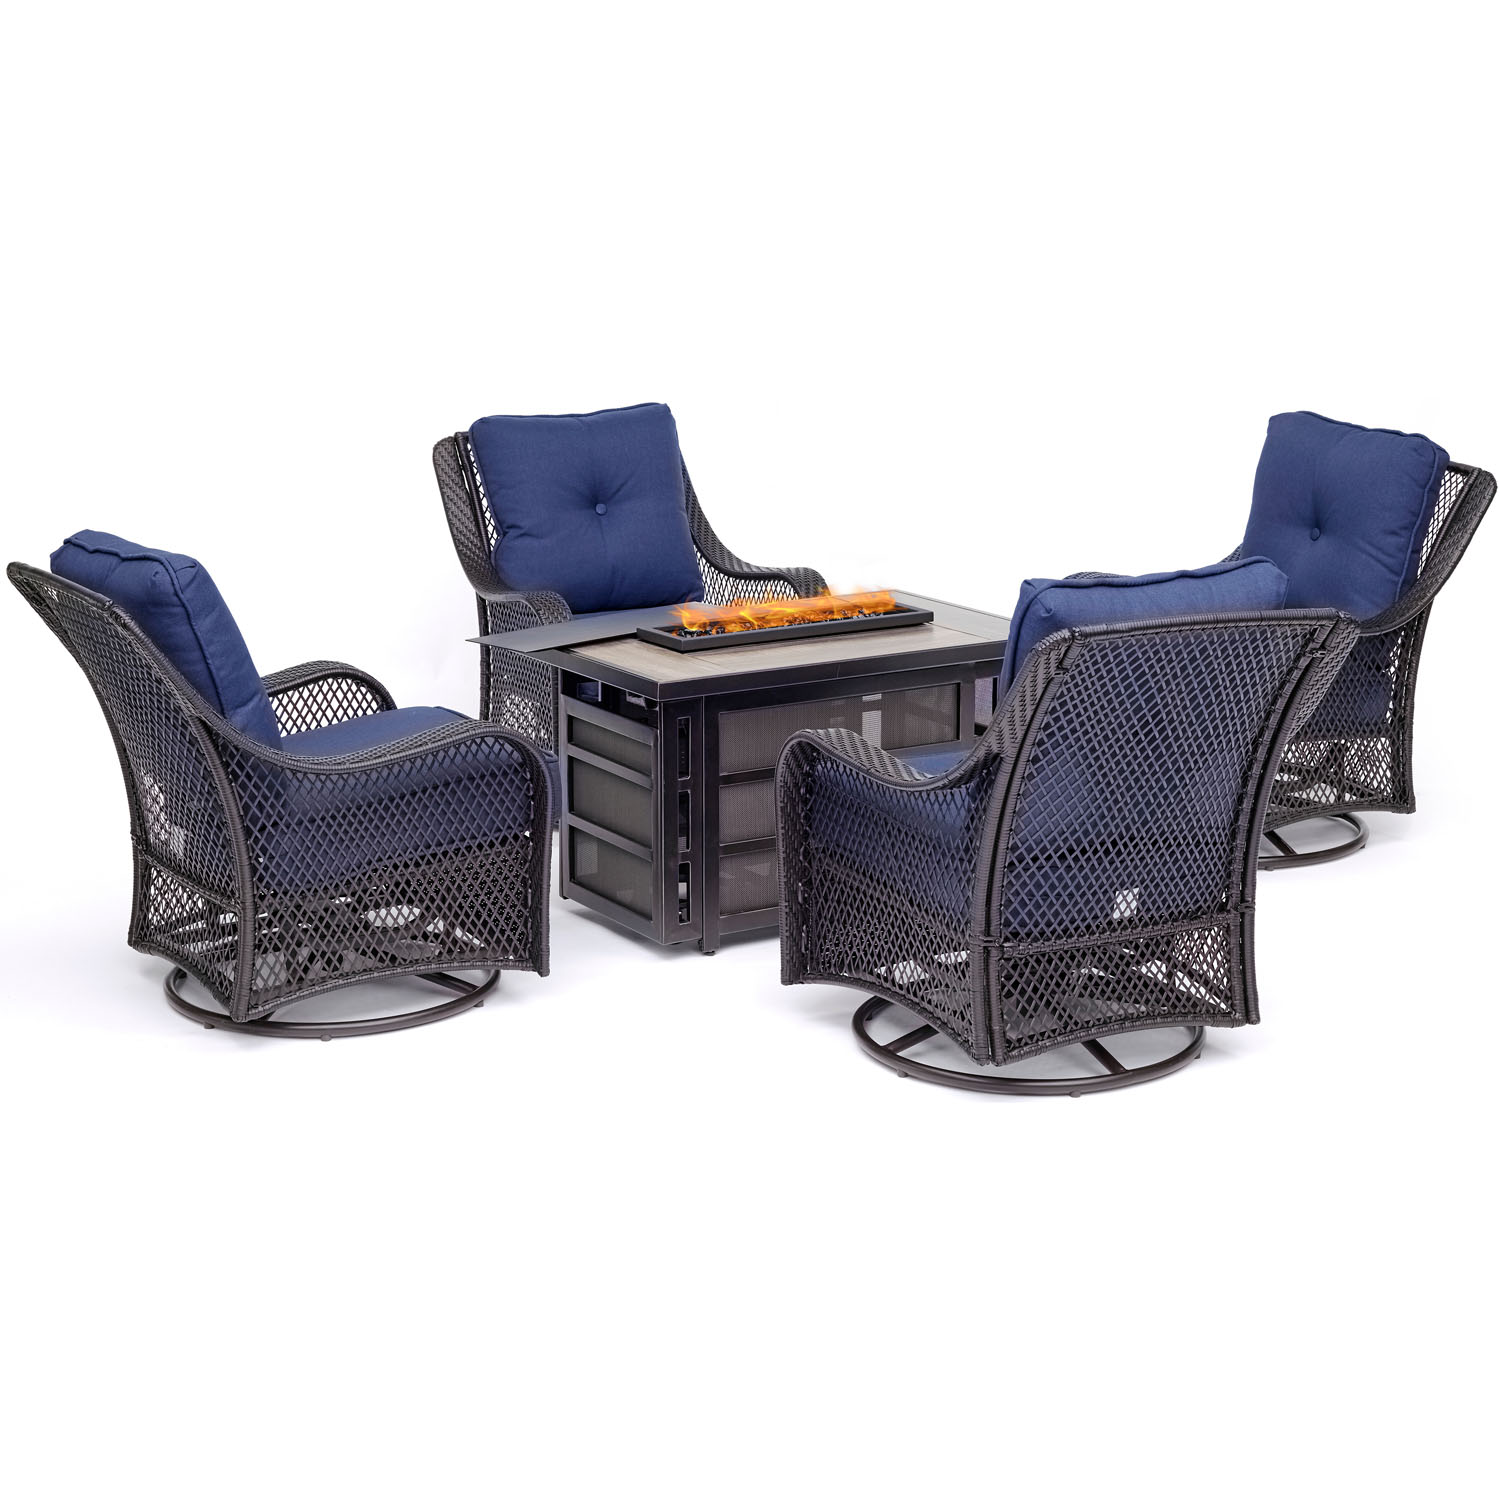 Hanover Orleans 5 Pcs Wicker and Steel Propane Fire Pit Chat Set, Navy Blue - image 1 of 10